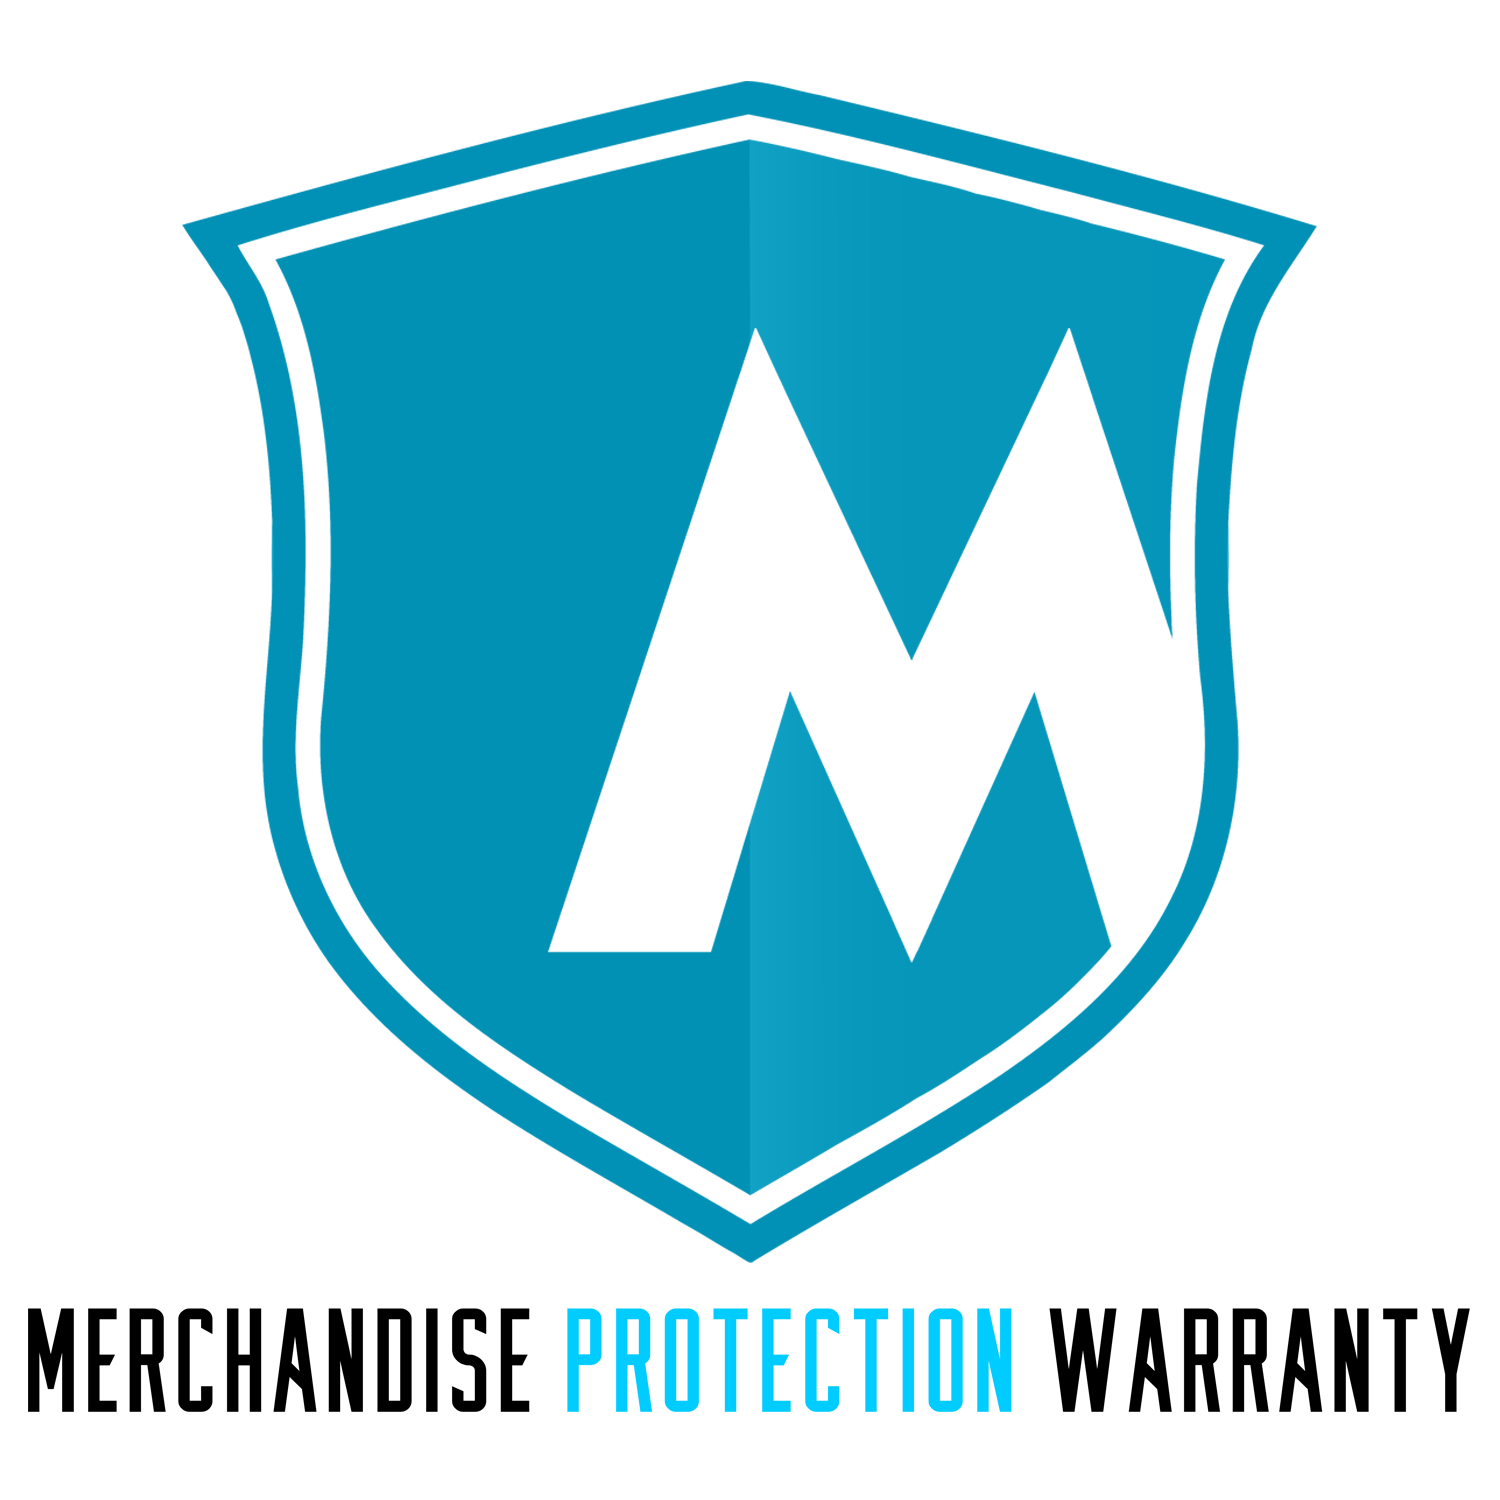 2 Year Merchandise Protection Warranty under $500 (Accidental, Prepaid Shipping)